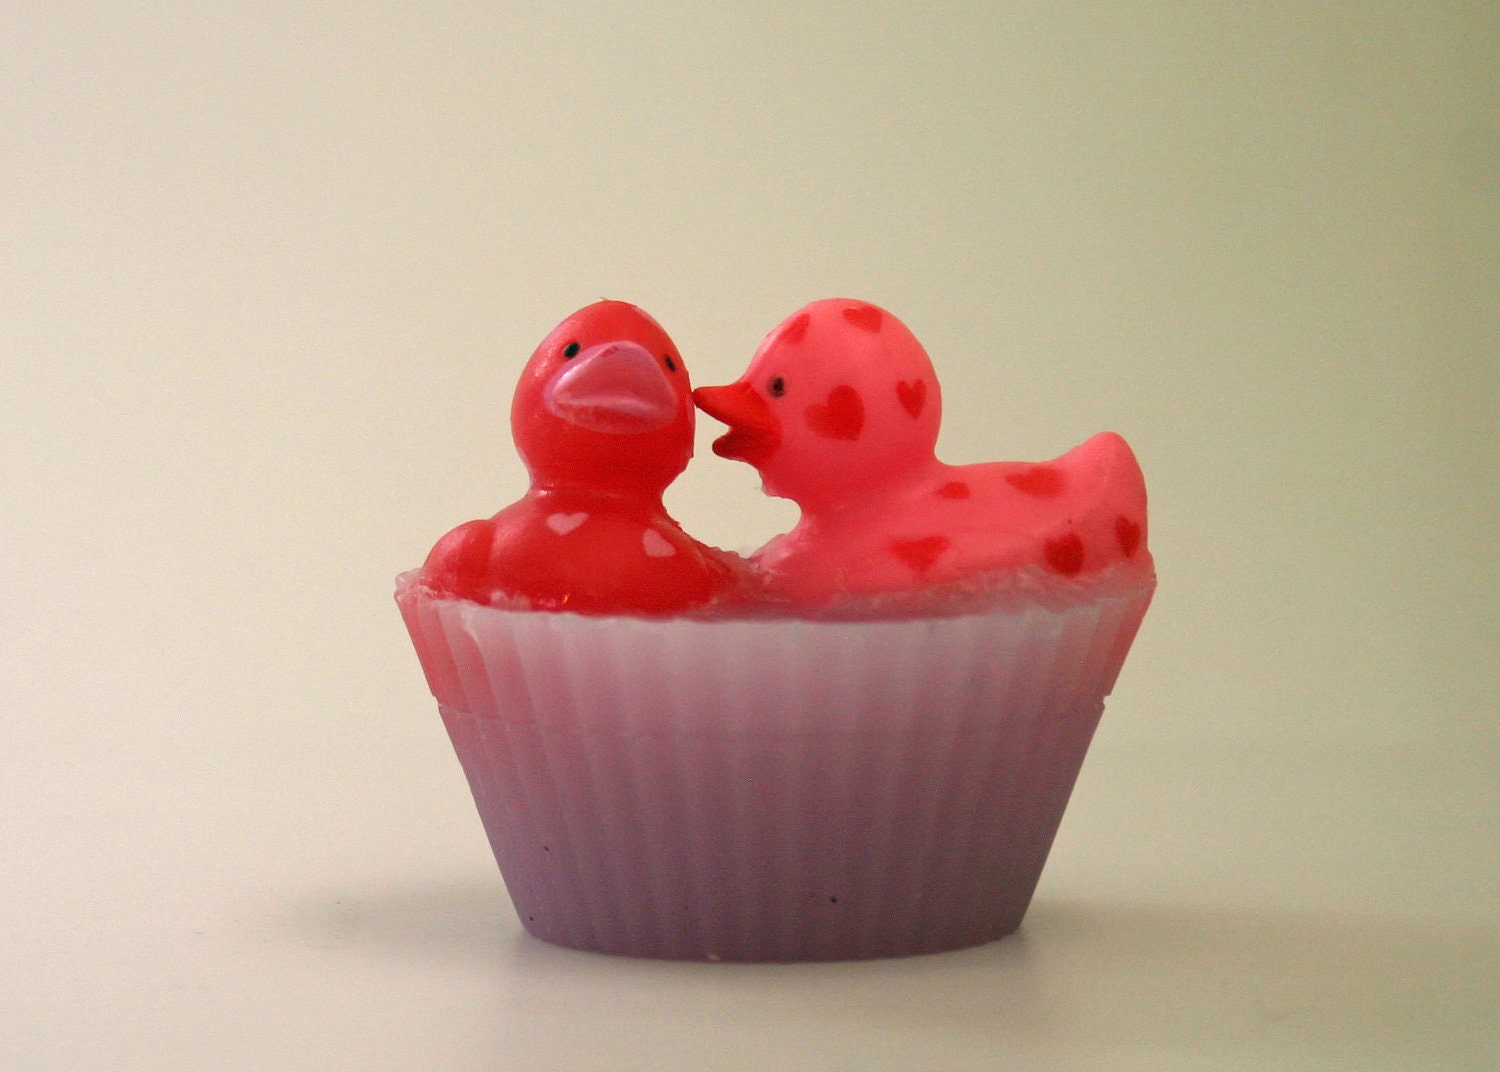 Lovey Dovey Kissing Rubber Duckies Valentines Day Soap Novelty Bathtime Fun Custom Scent Color